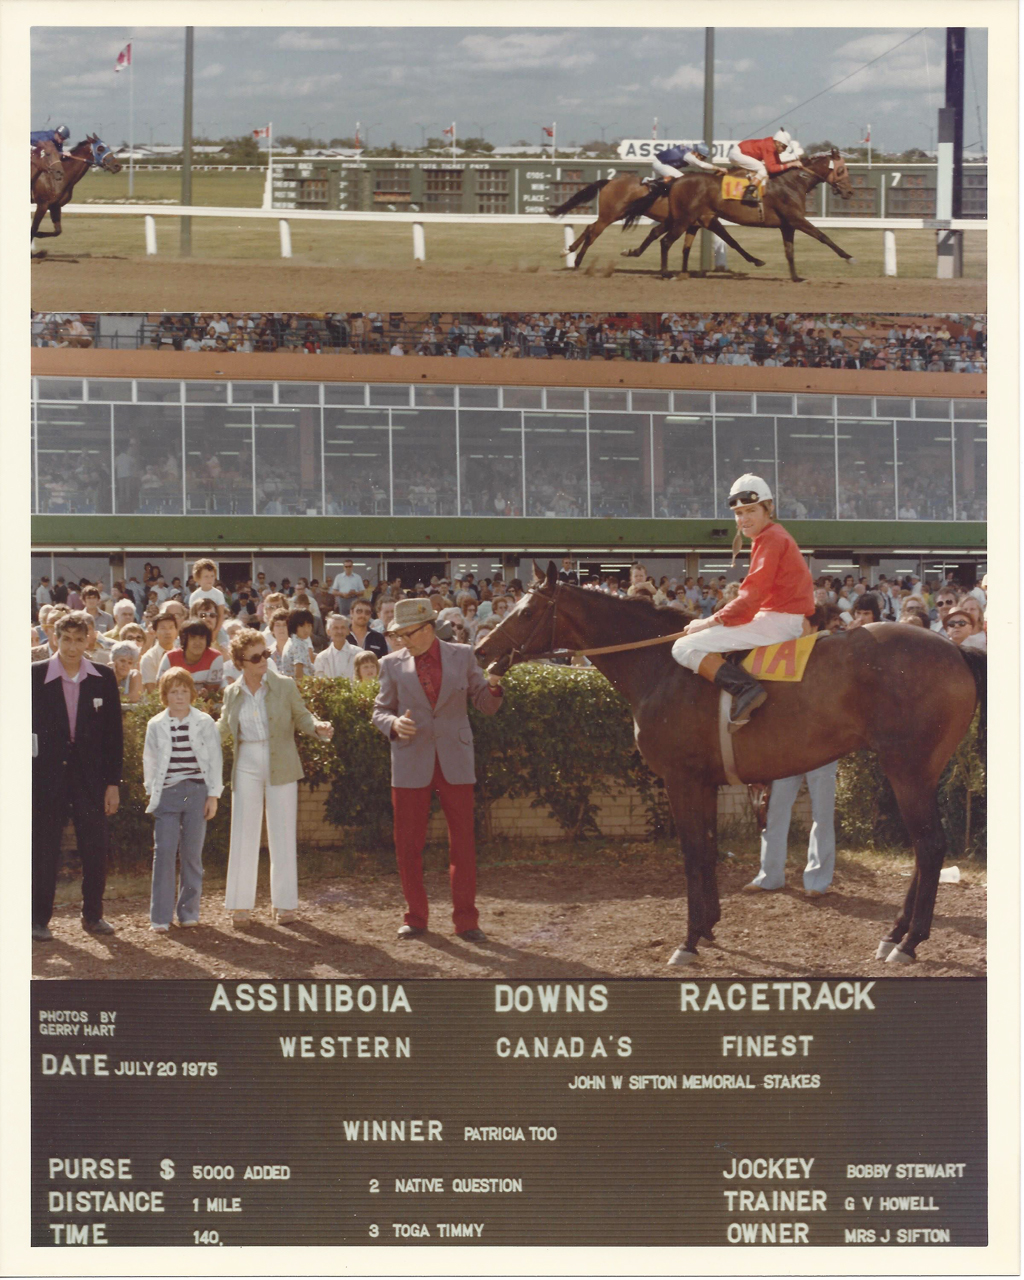 Patricia Too wins John W Sifton Memorial Stakes. July 20, 1975.